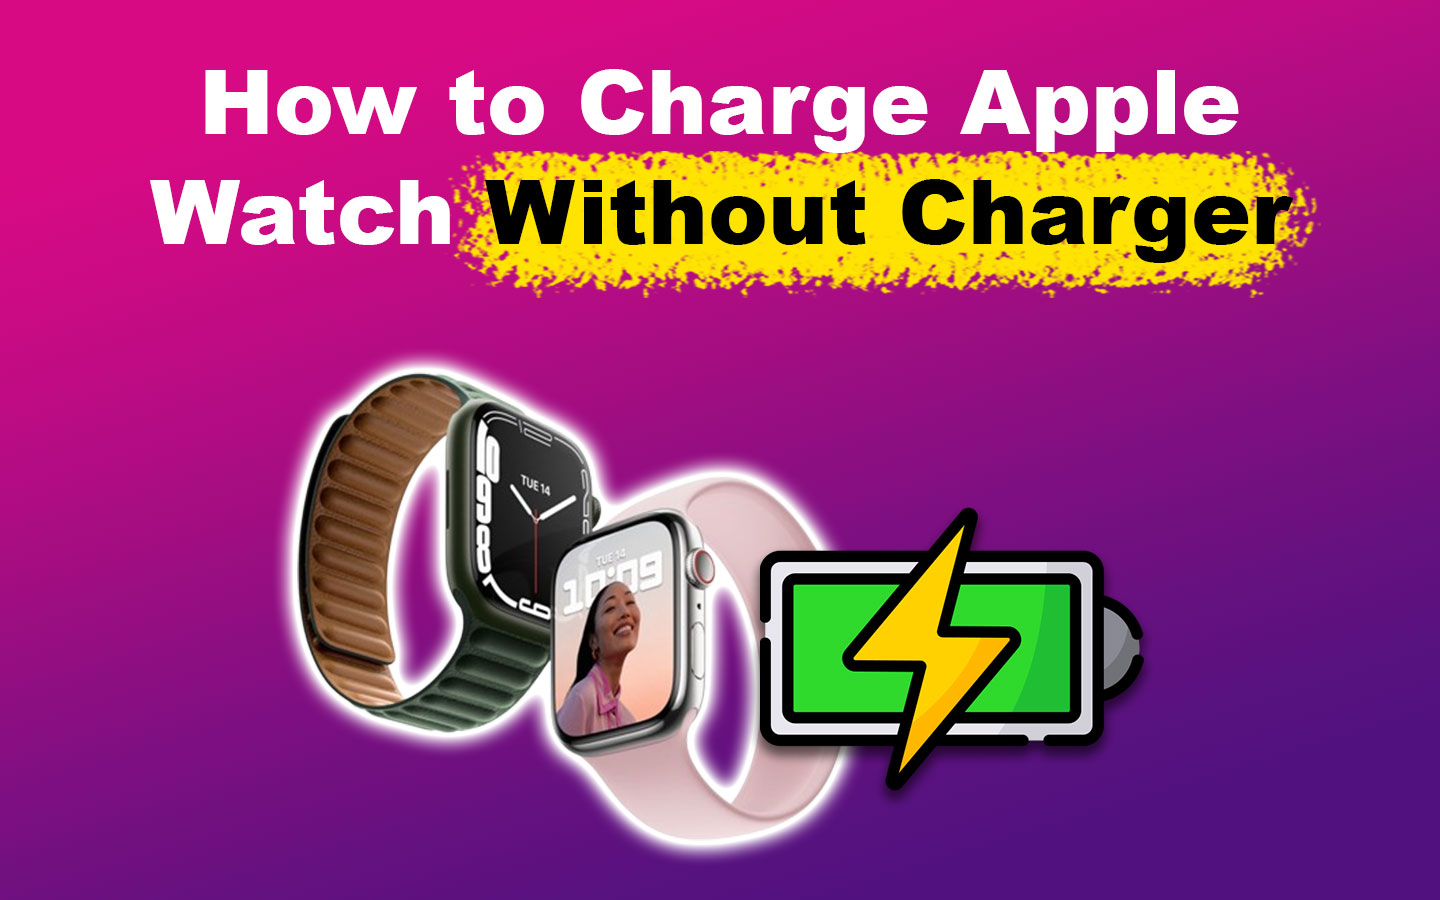 3 Easy Ways to Charge Apple Watch Without Charger